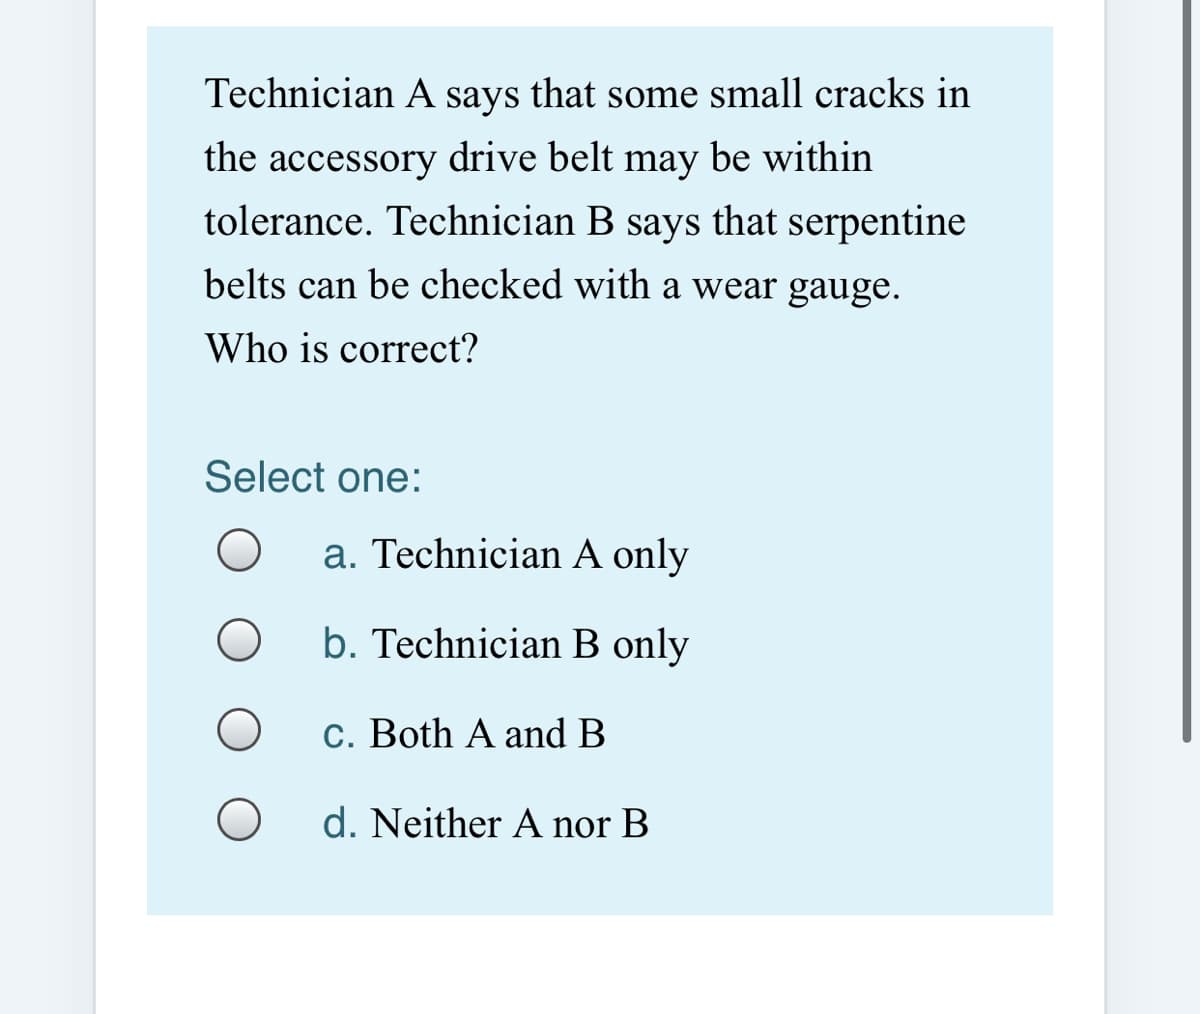 Technician A says that some small cracks in
the accessory drive belt may be within
tolerance. Technician B says that serpentine
belts can be checked with a wear gauge.
Who is correct?
Select one:
a. Technician A only
b. Technician B only
C. Both A and B
d. Neither A nor B
